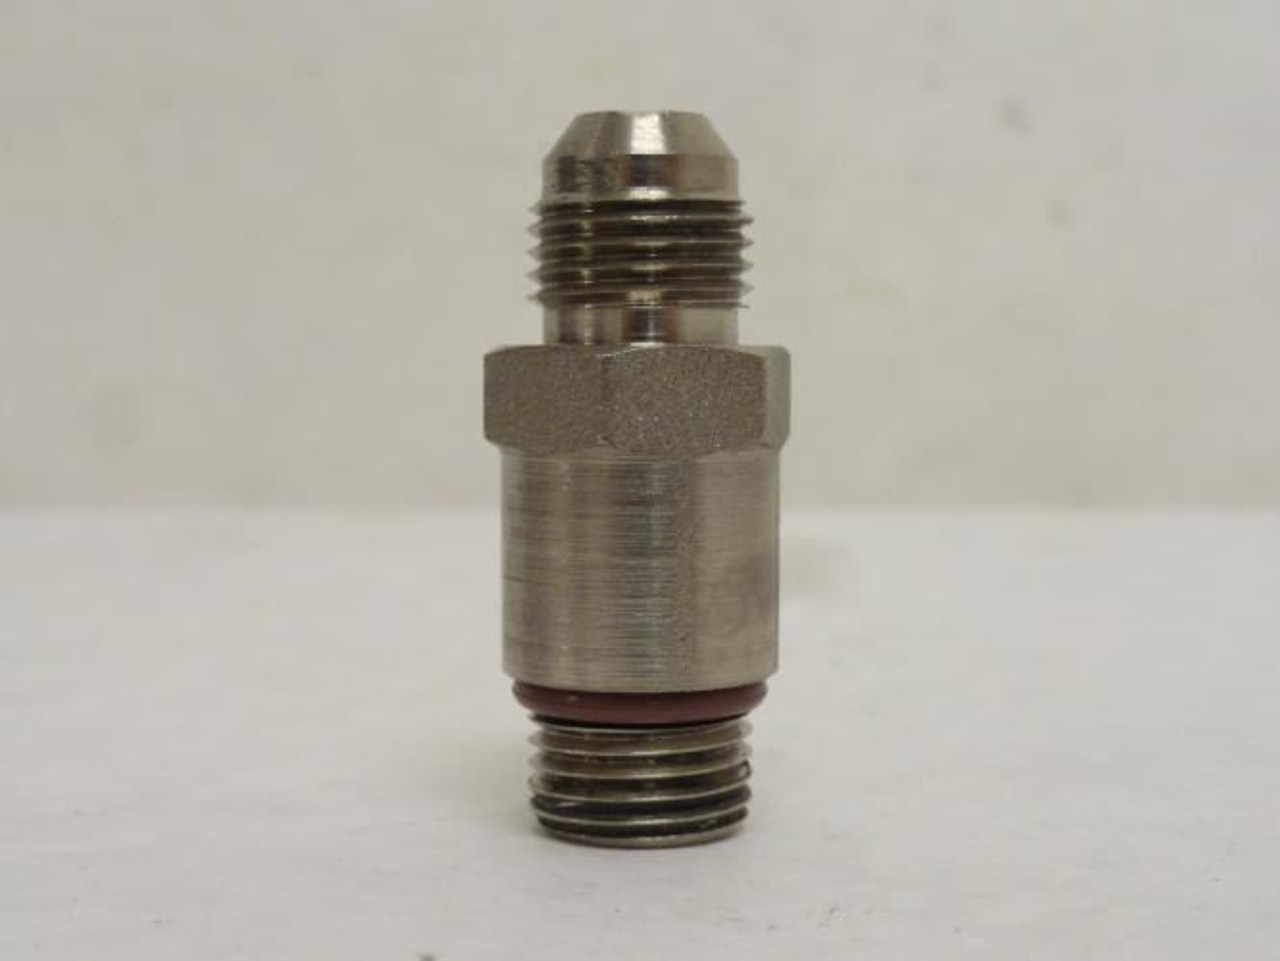 159001628 - Fittings and connectors for liquid and hydraulic